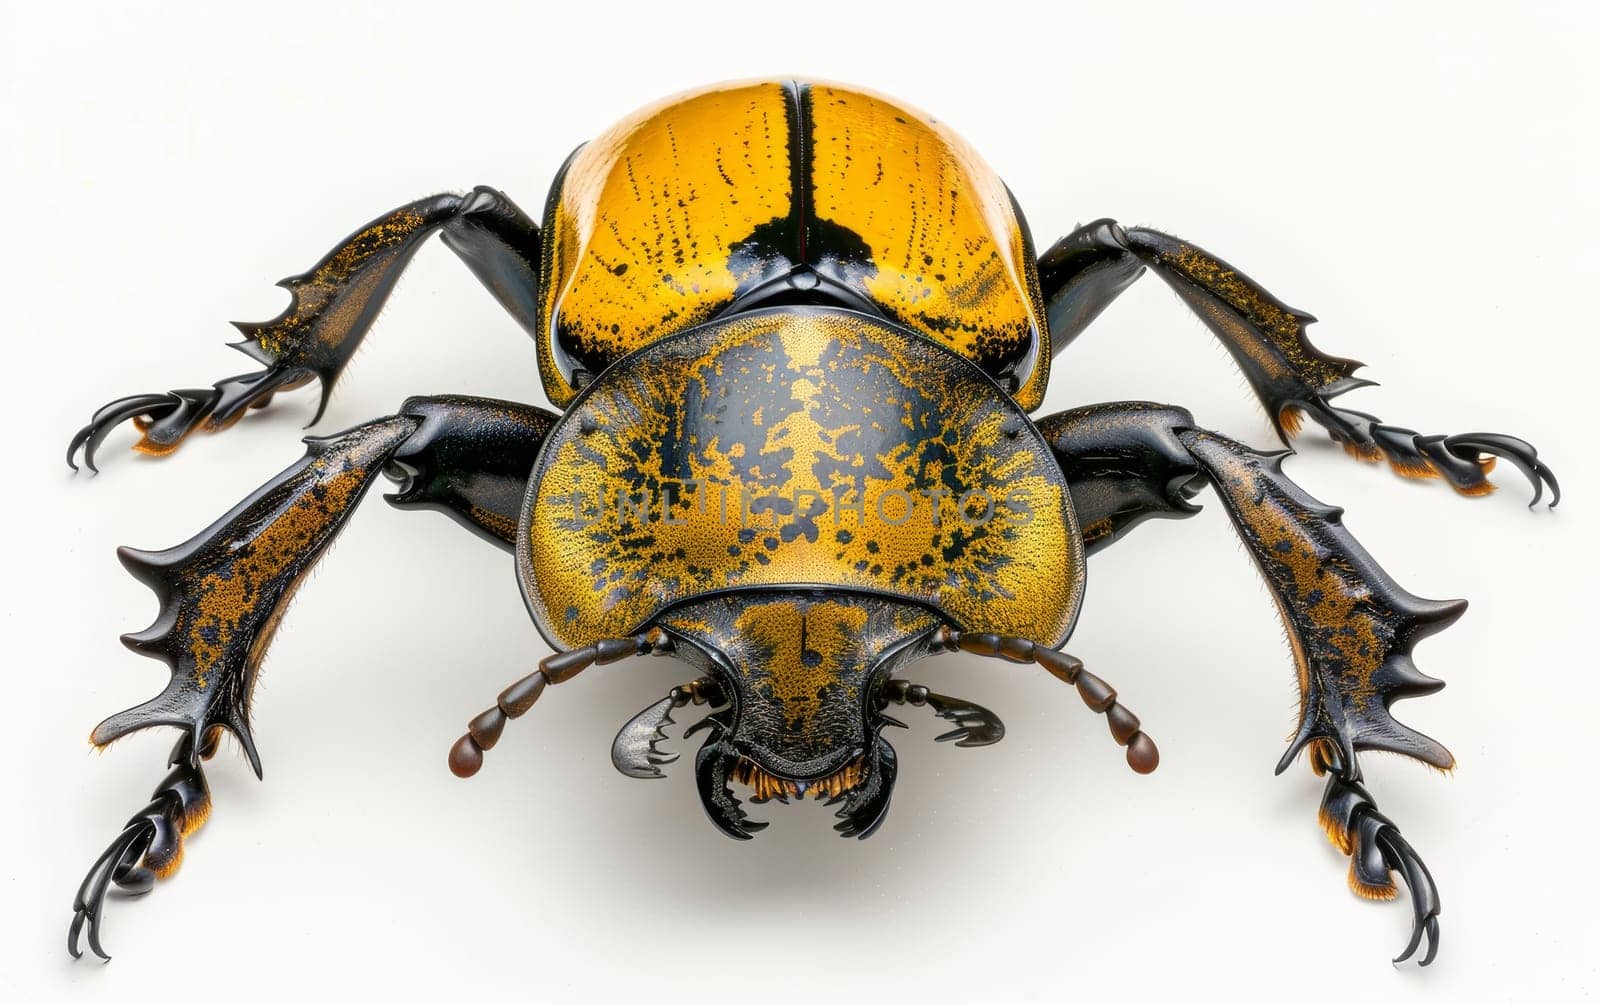 The Hercules beetle is presented in full splendor, its golden shell and intricate patterns highlighted against a stark white background.. by sfinks